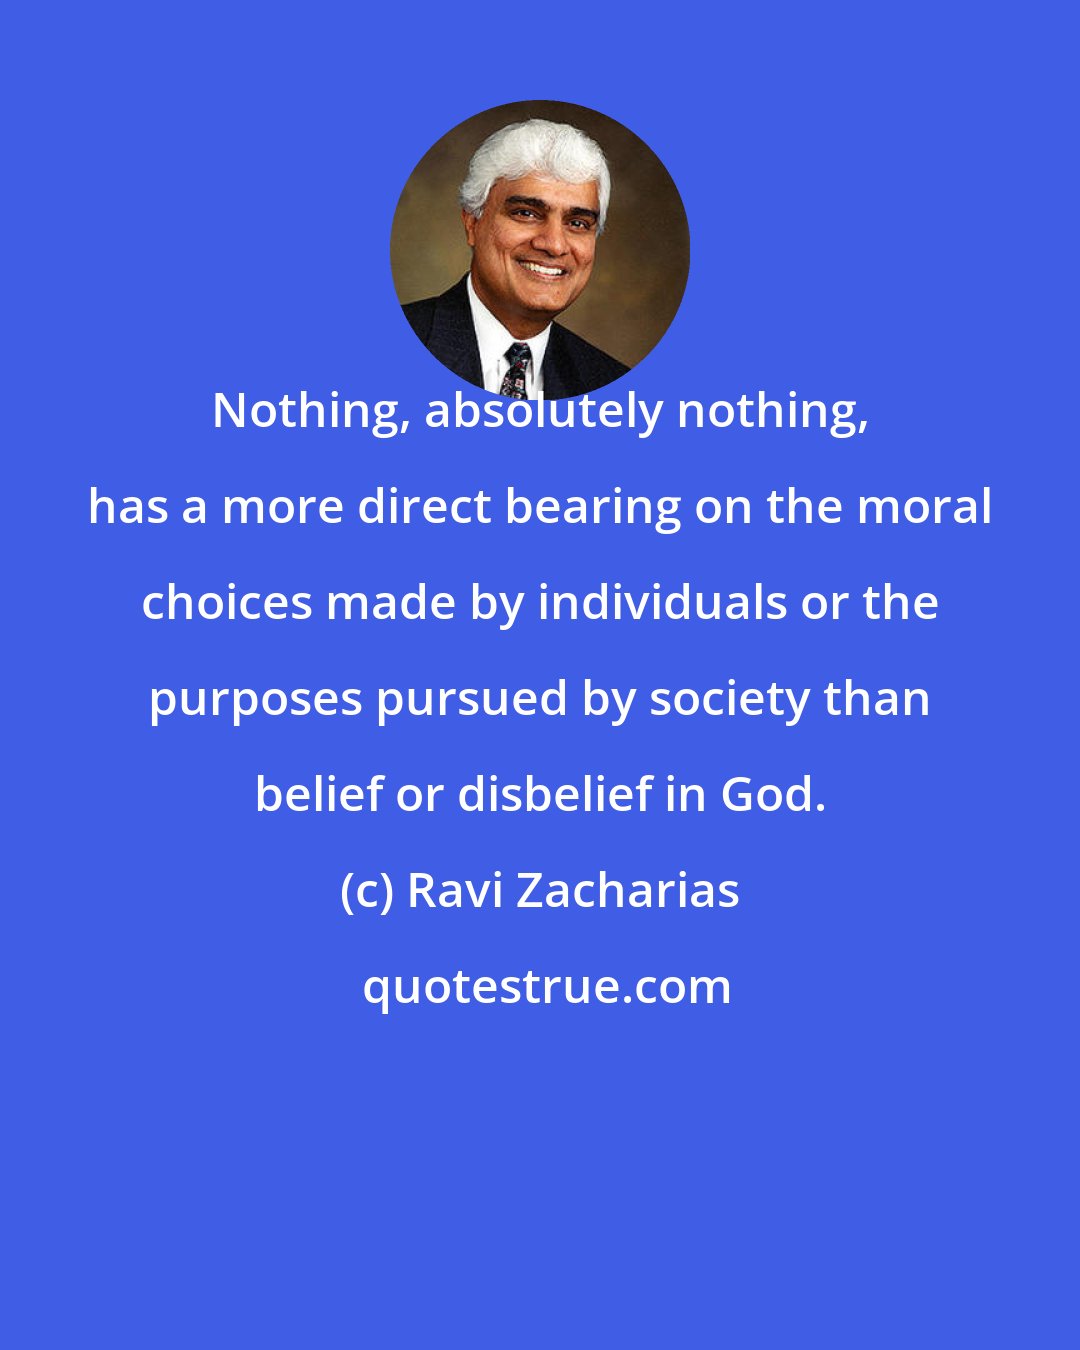 Ravi Zacharias: Nothing, absolutely nothing, has a more direct bearing on the moral choices made by individuals or the purposes pursued by society than belief or disbelief in God.